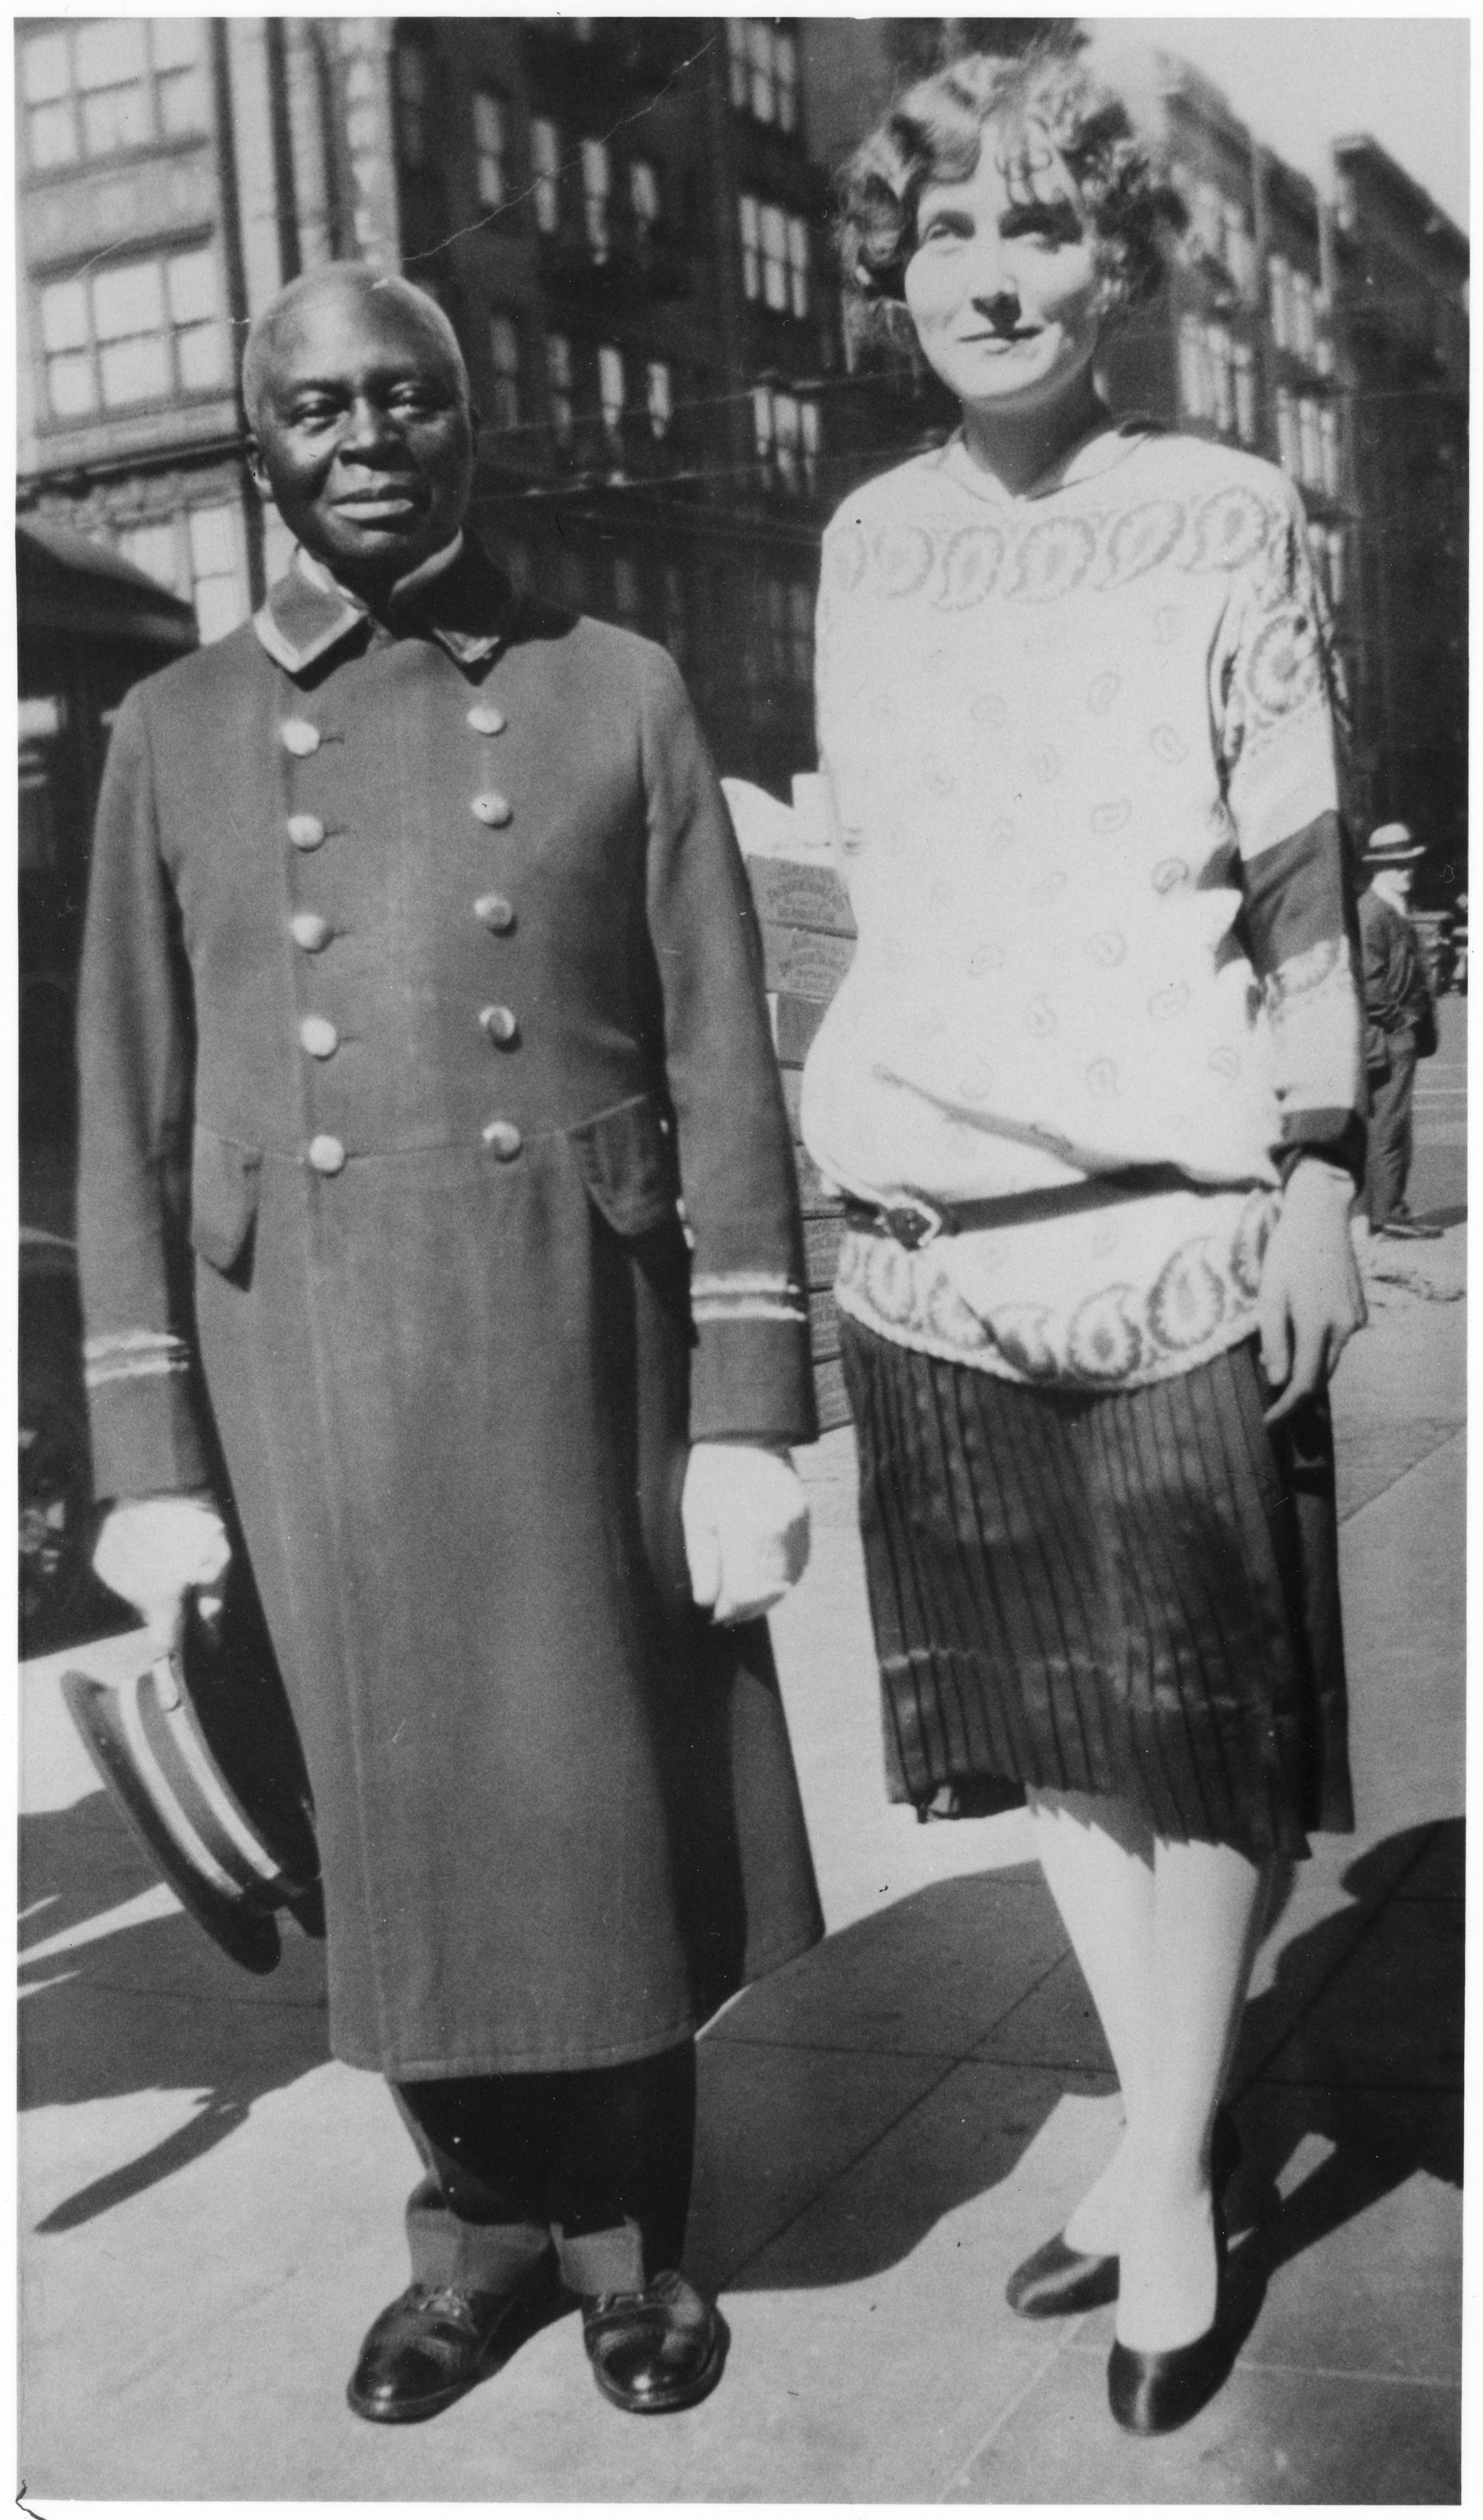 Photo of Frank Loper, circa 1925, when he was working as a doorman for the Antlers Hotel. He is pictured with Mrs. Glen Hutchinson, the hotel's bookkeeper. He is wearing a long doorman's coat with two stripes near the cuff of each the sleeve and ten shiny metal buttons on the front of the collared jacket. In his right hand, he is holding his uniform hat. Mrs. Hutchinson wears a skirt, tights, flat black shoes, and a lacy long sweater. They are standing in the sidewalk, presumably in front of the hotel.